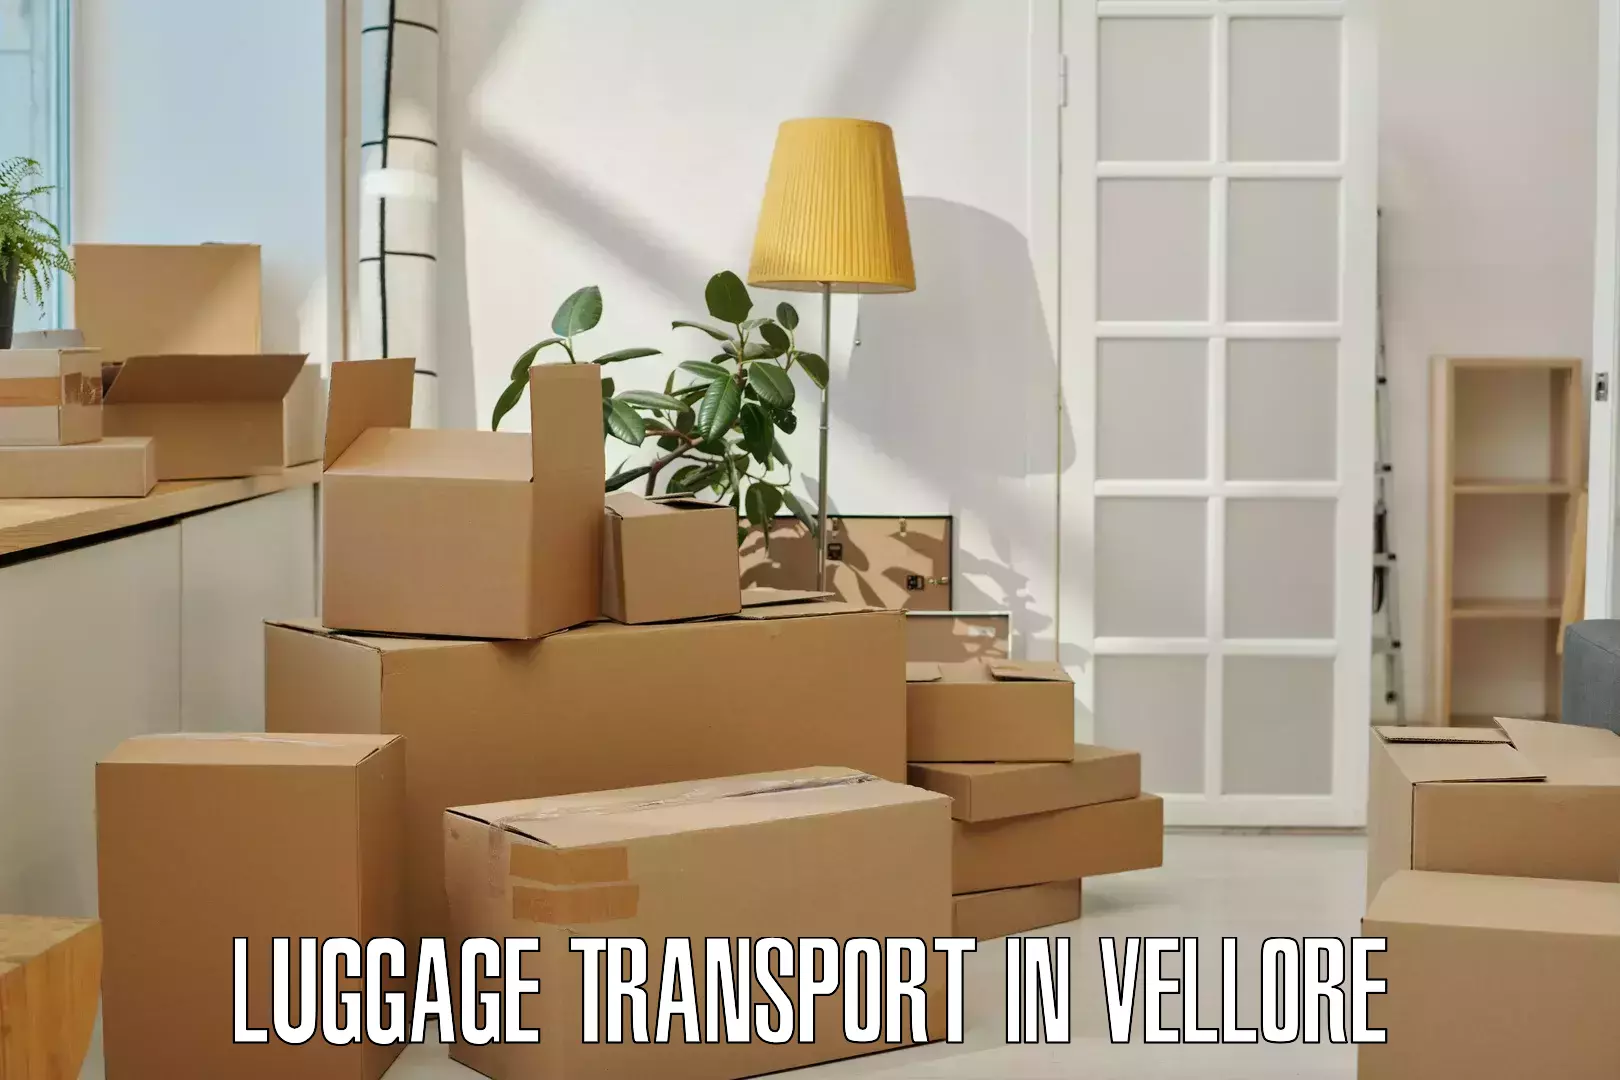 Business luggage transport in Vellore